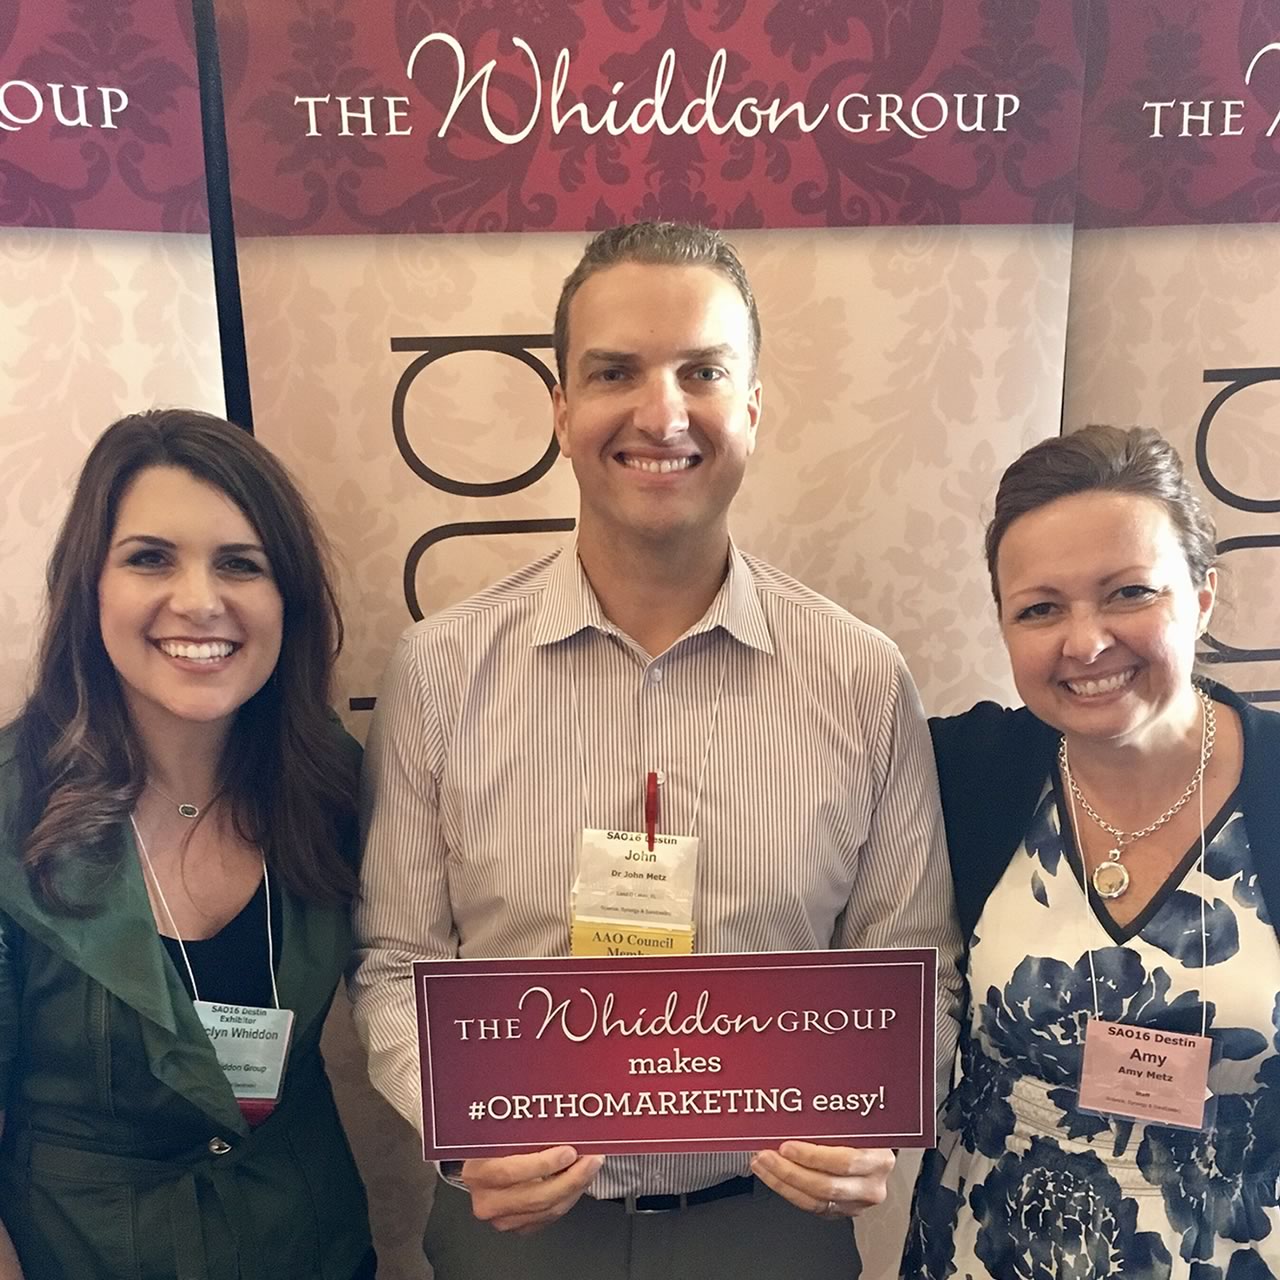 about - The Whiddon Group